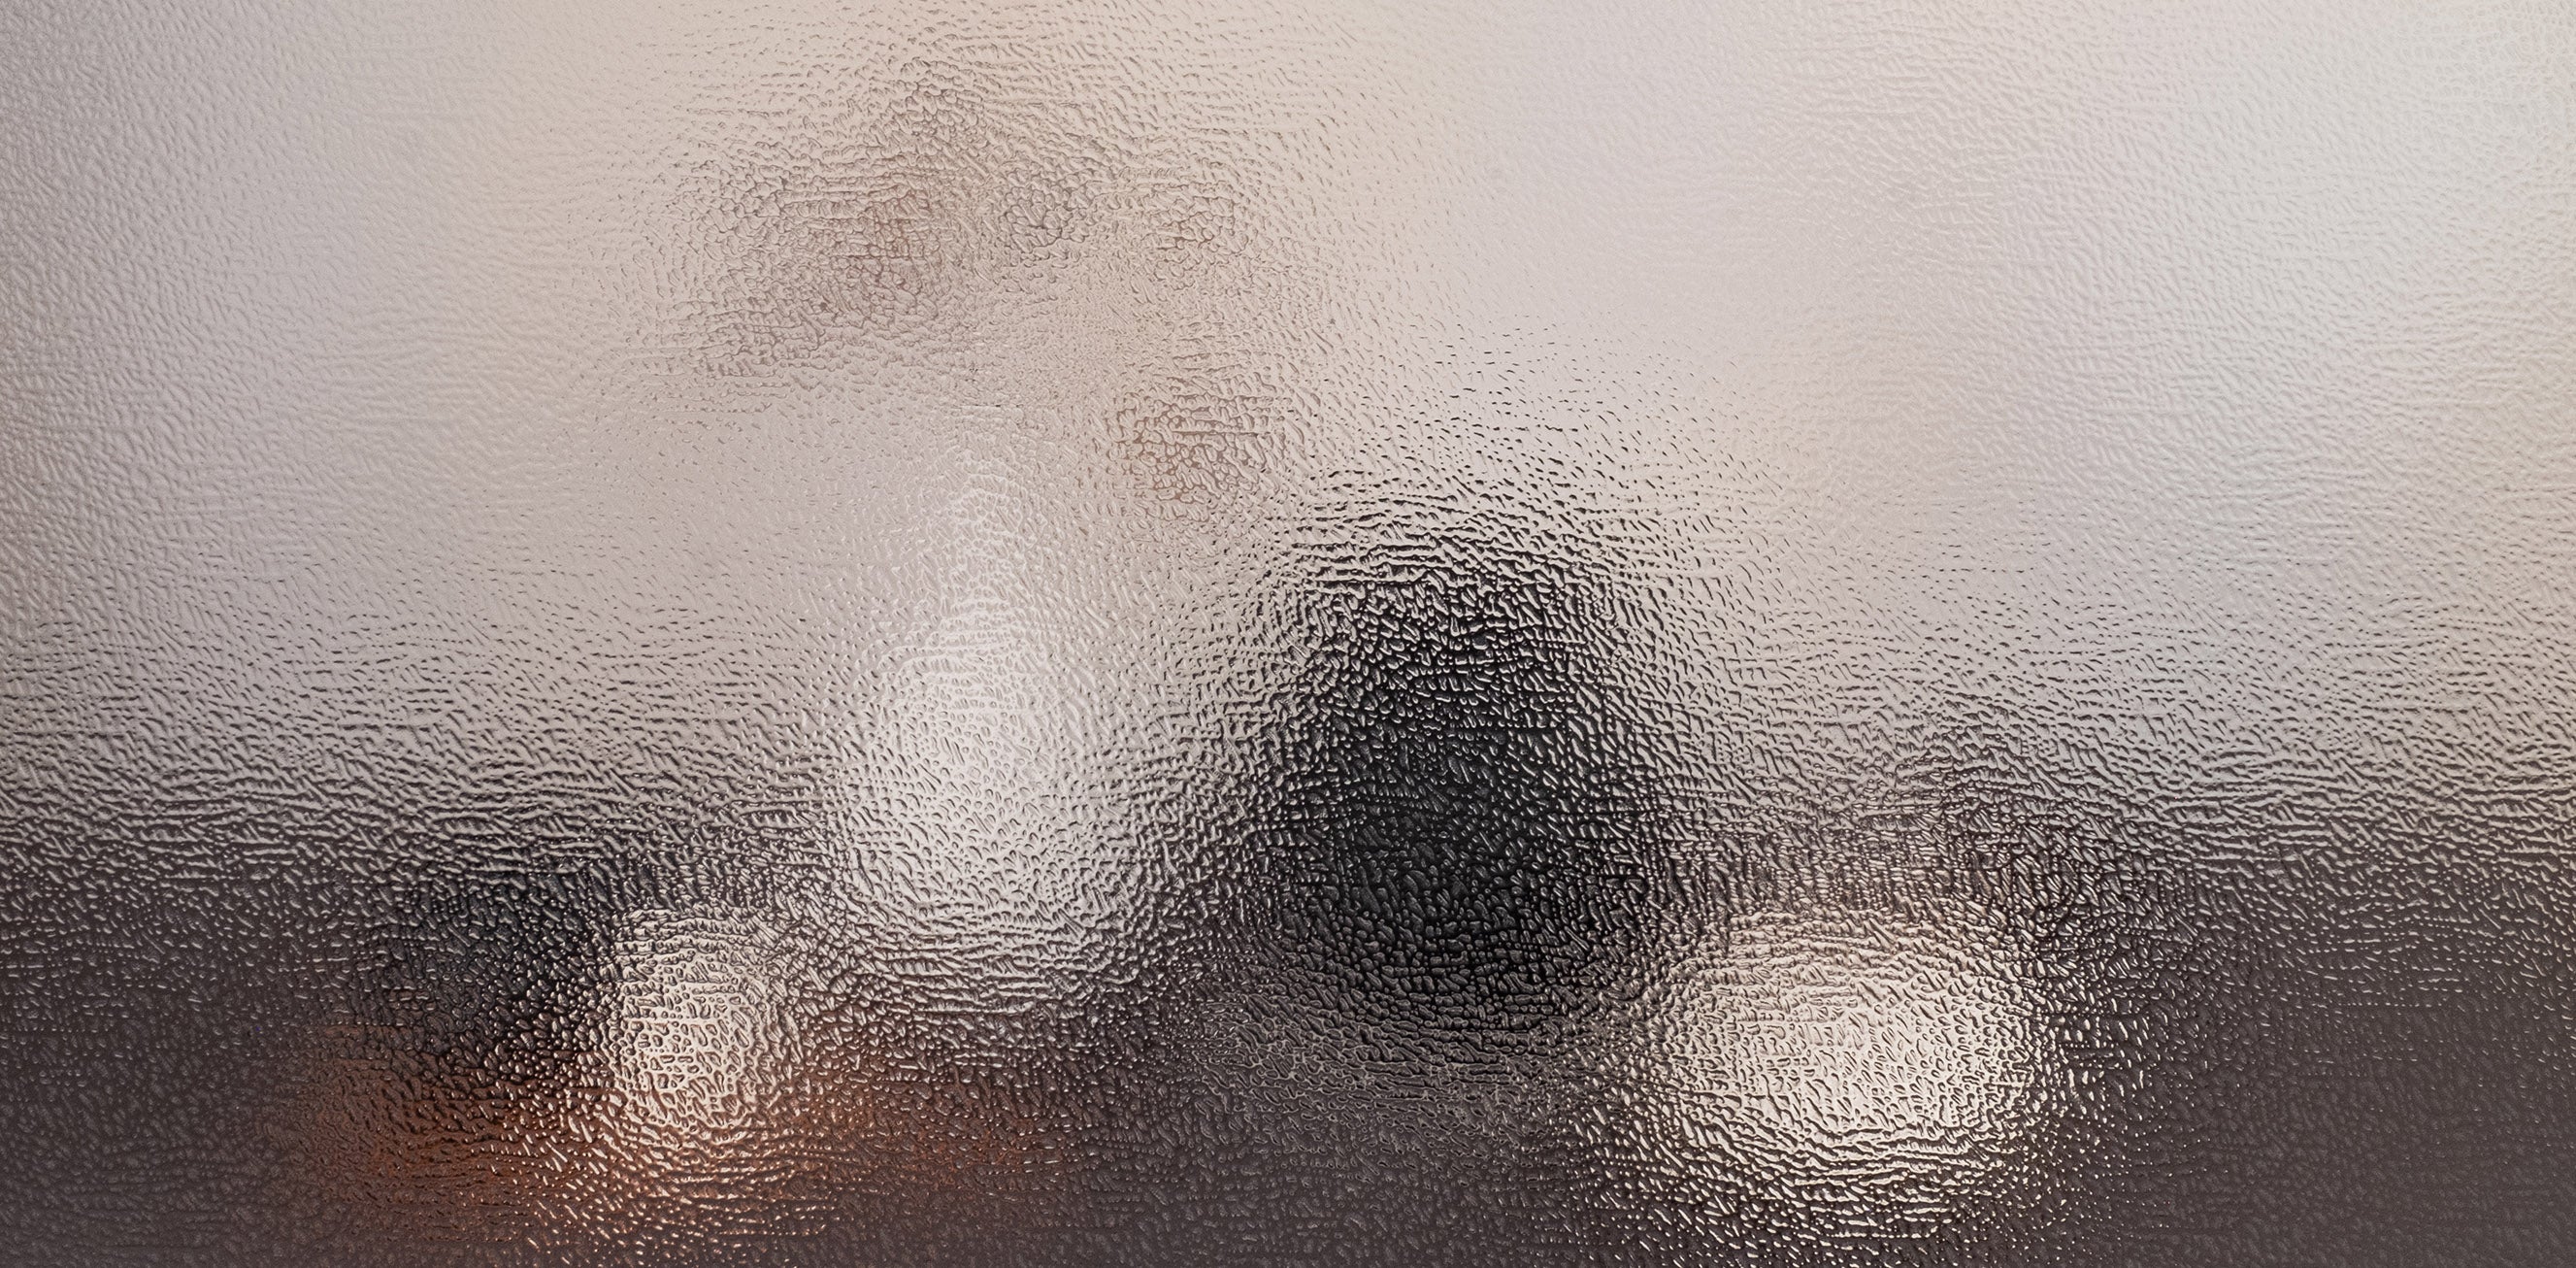 An image of a still life setting, obscured by the Texture Twelve window film in order to exhibit the privacy level of the selected film.